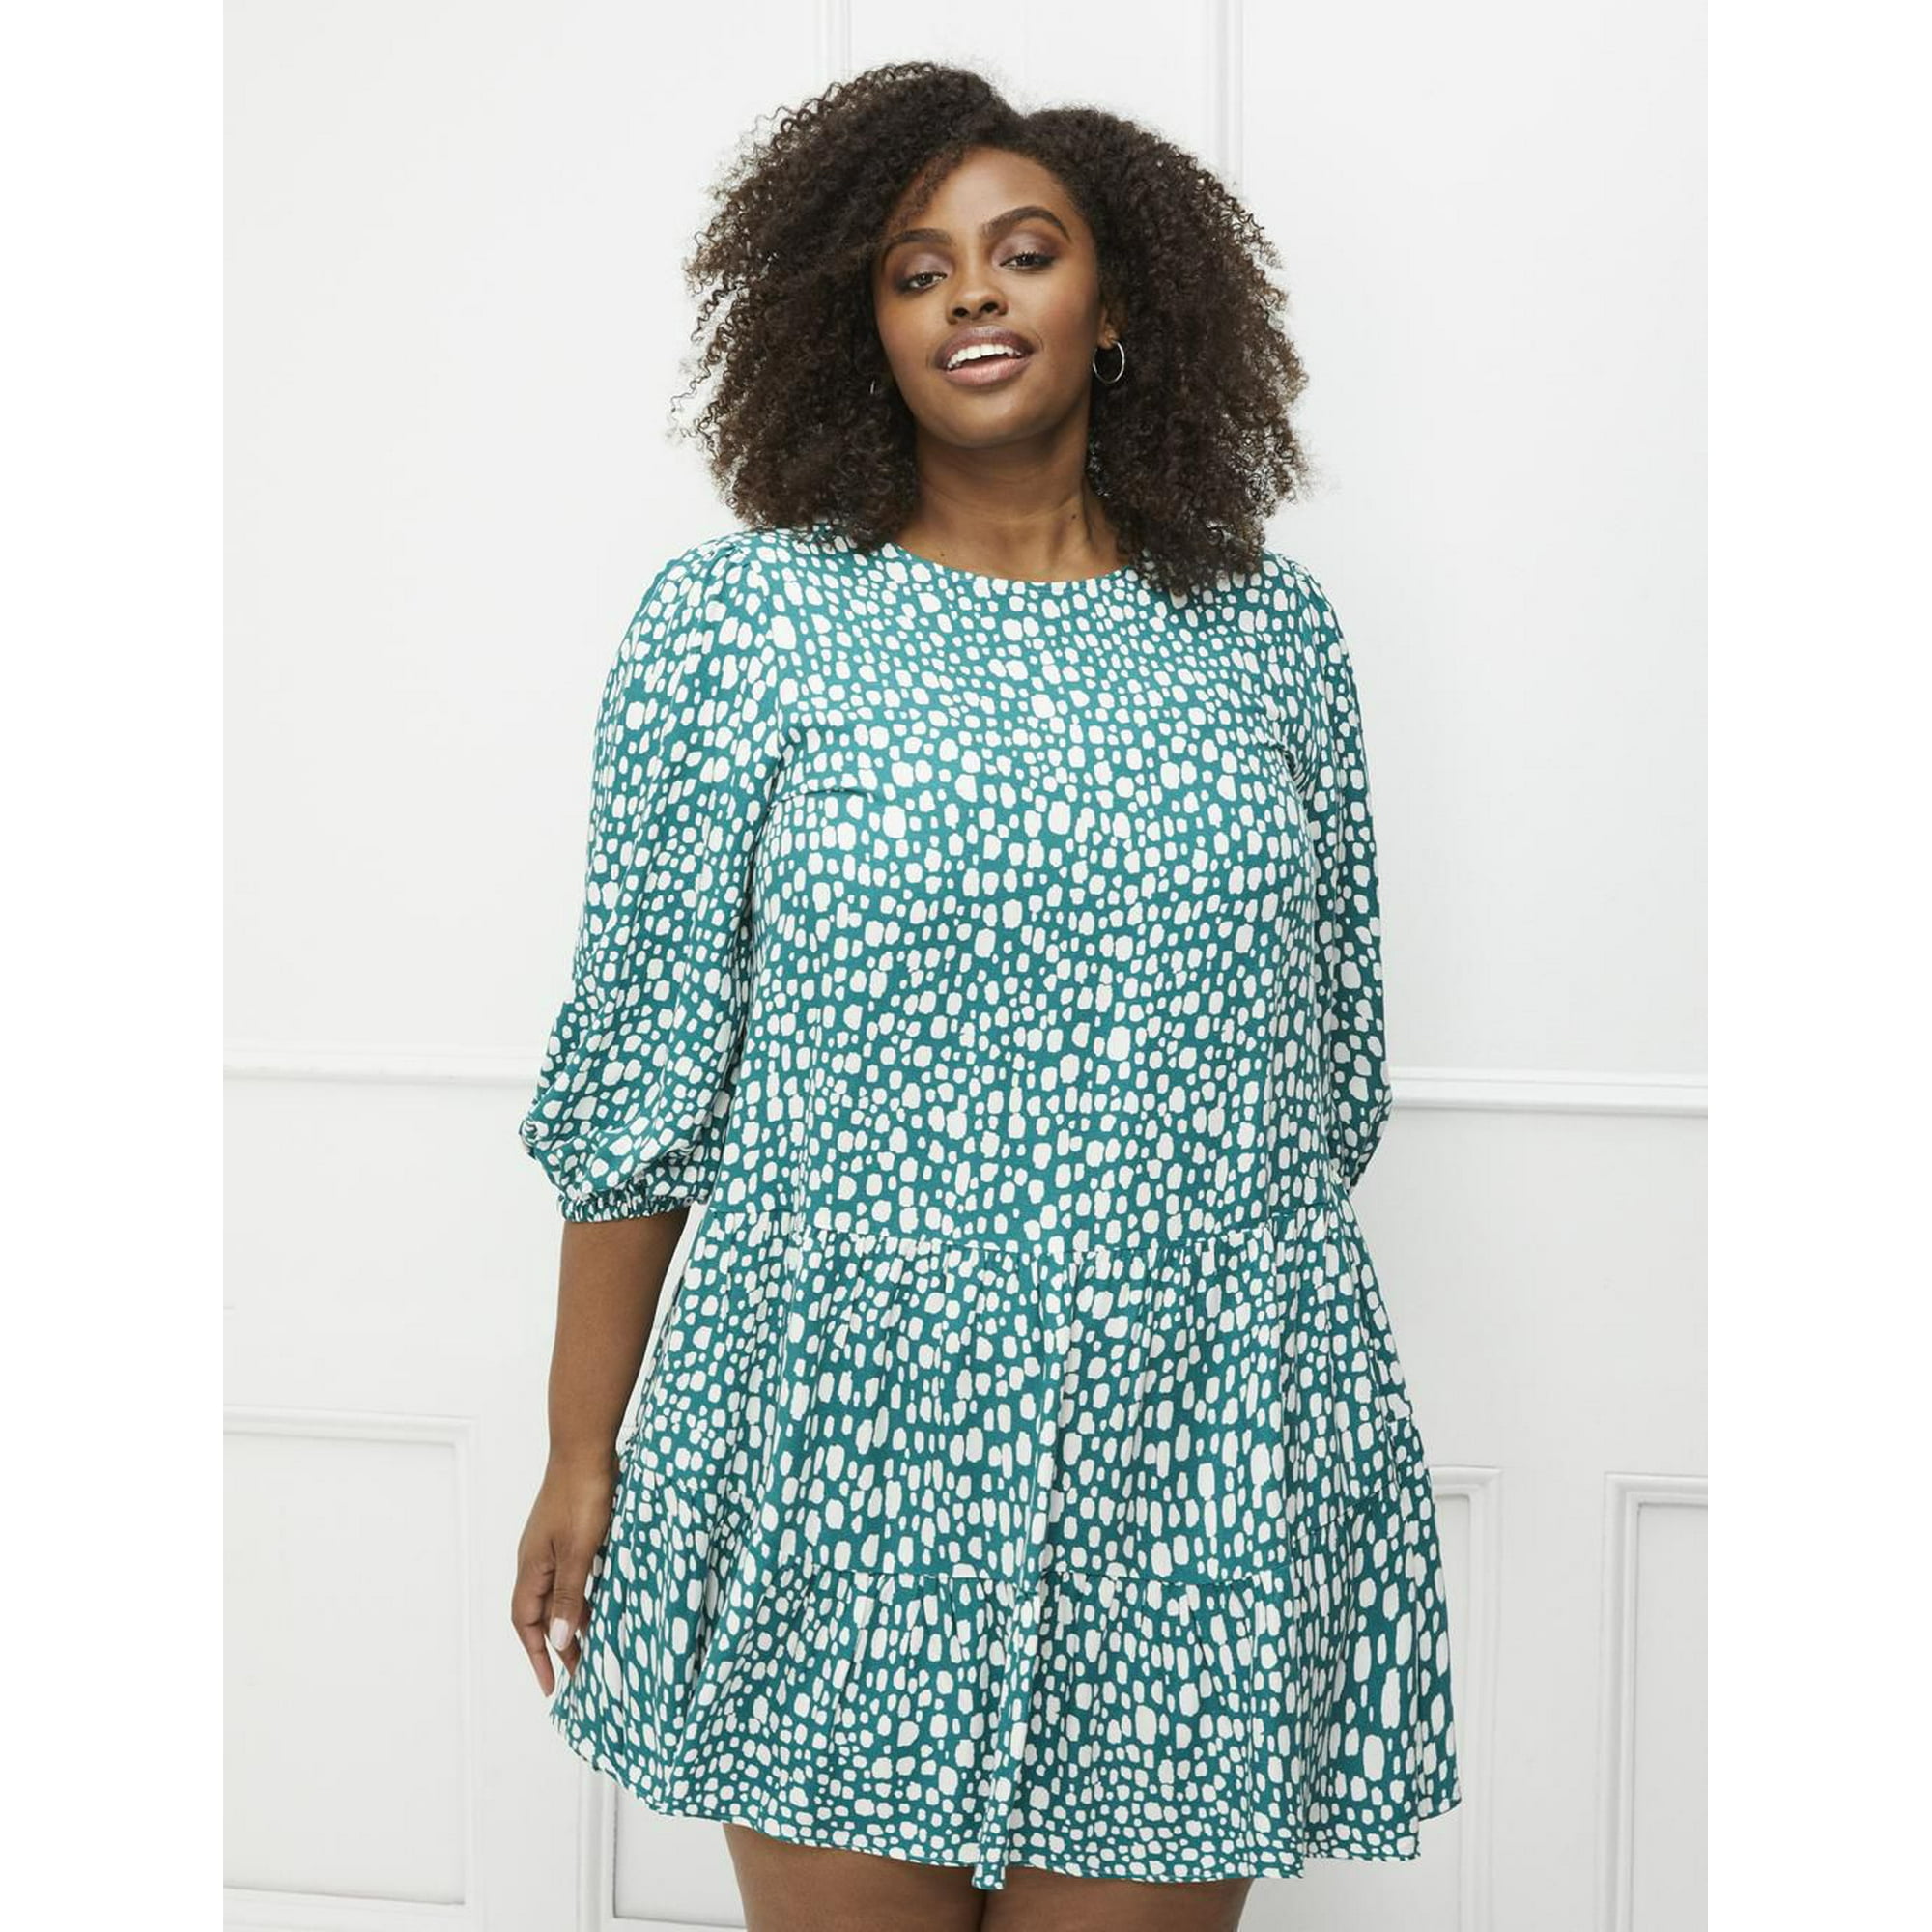 Women's Plus Size Clothing, Everyday Low Prices